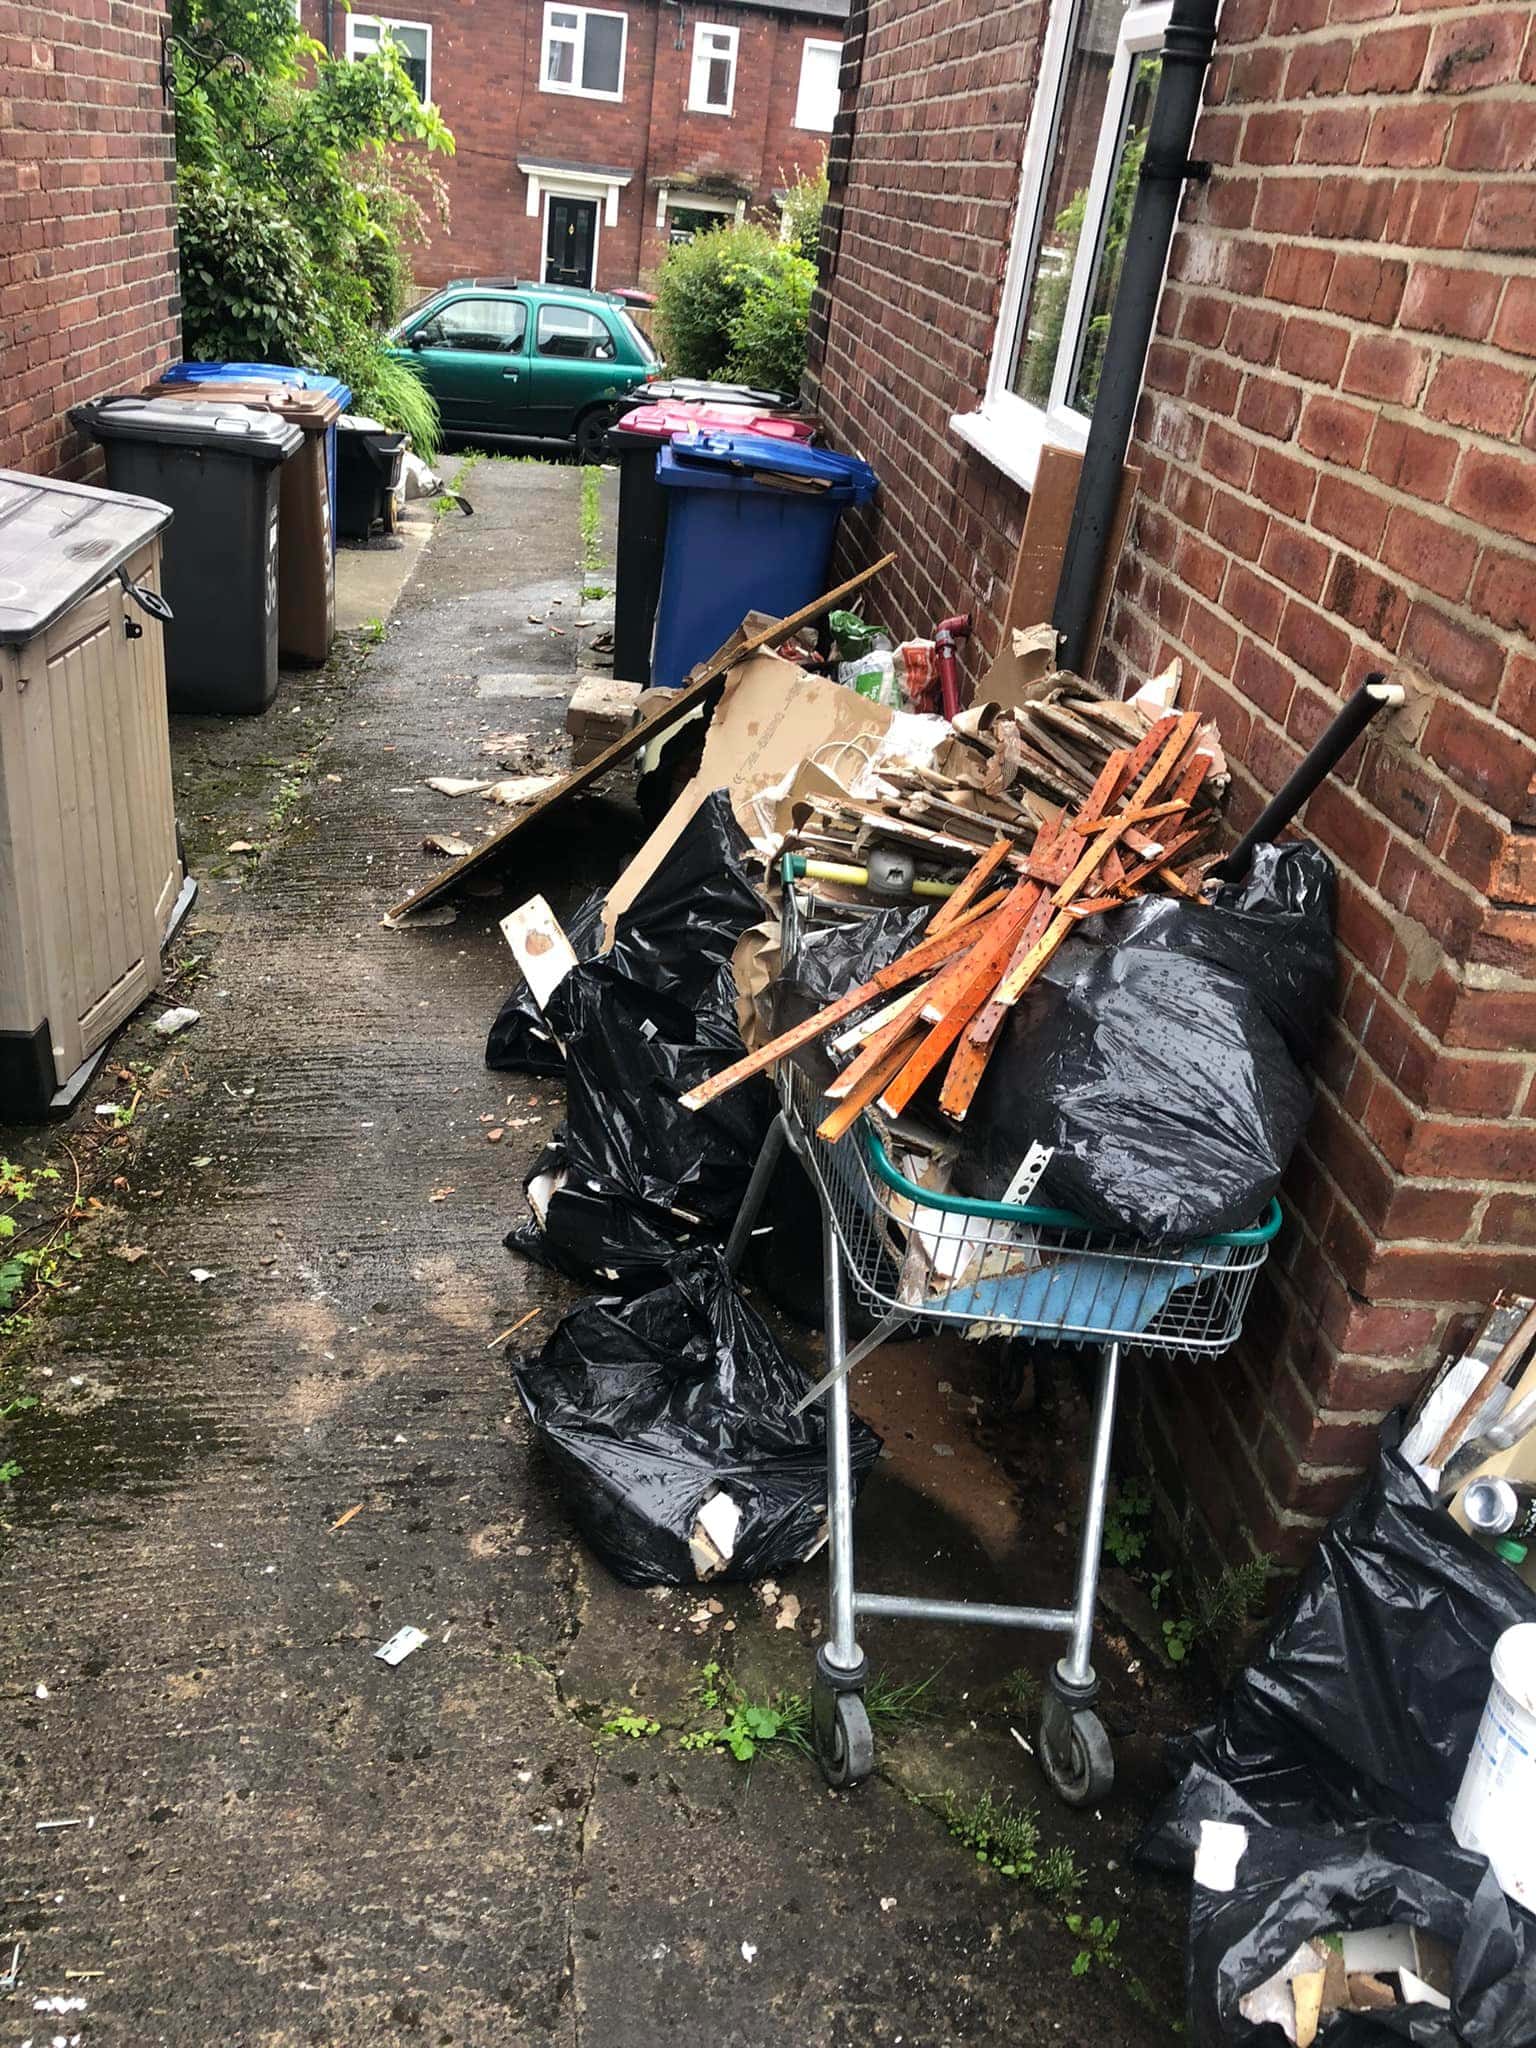 Cleared 4 U - Waste Removal Manchester, UK, junk removals